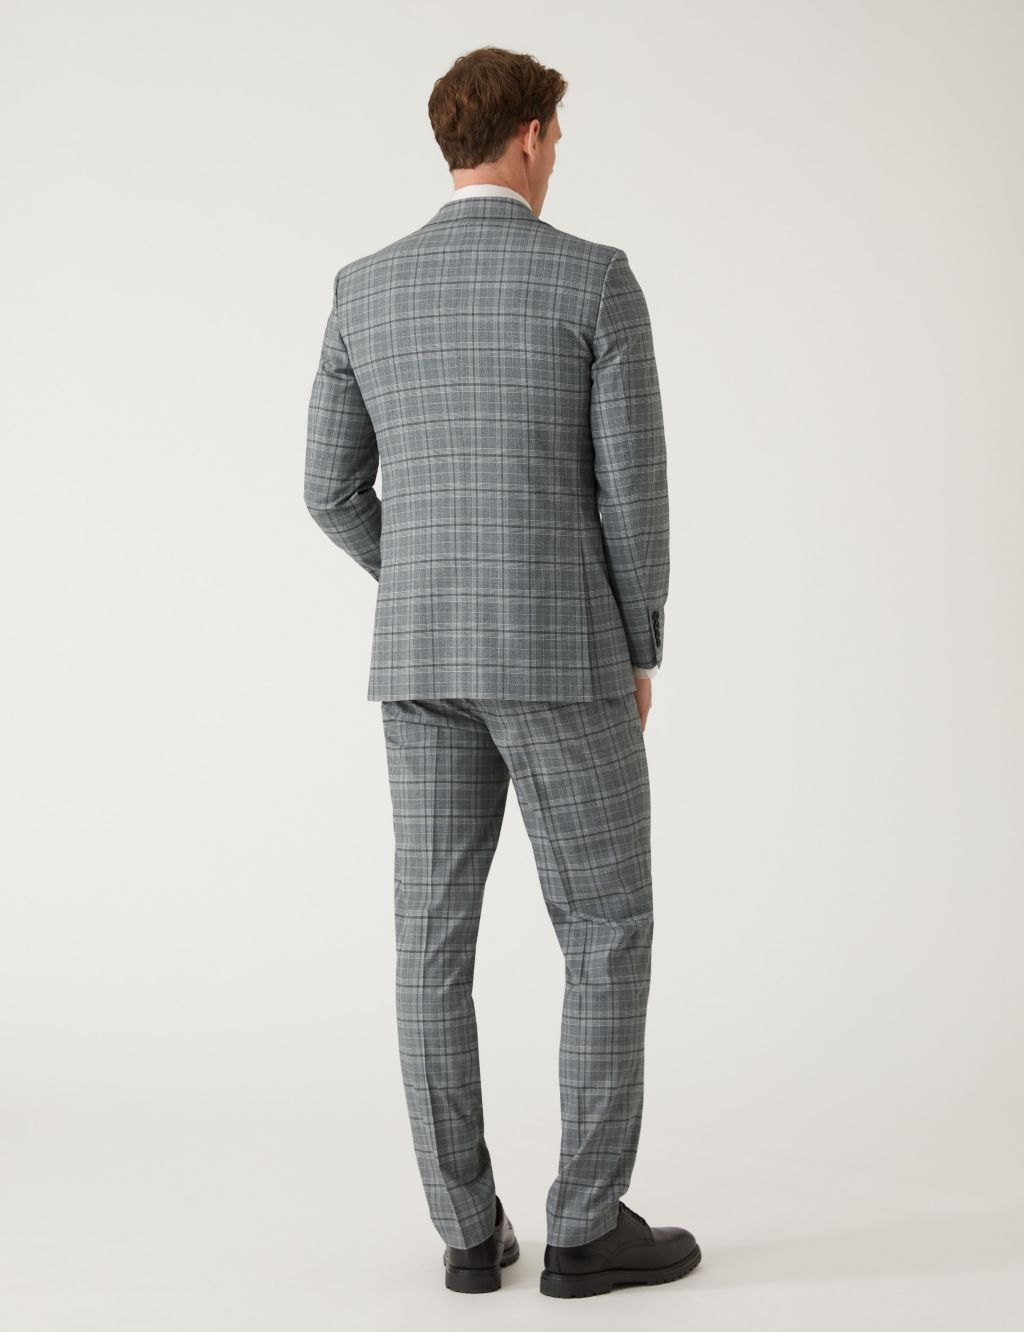 Slim Fit Prince of Wales Check Suit Jacket image 5